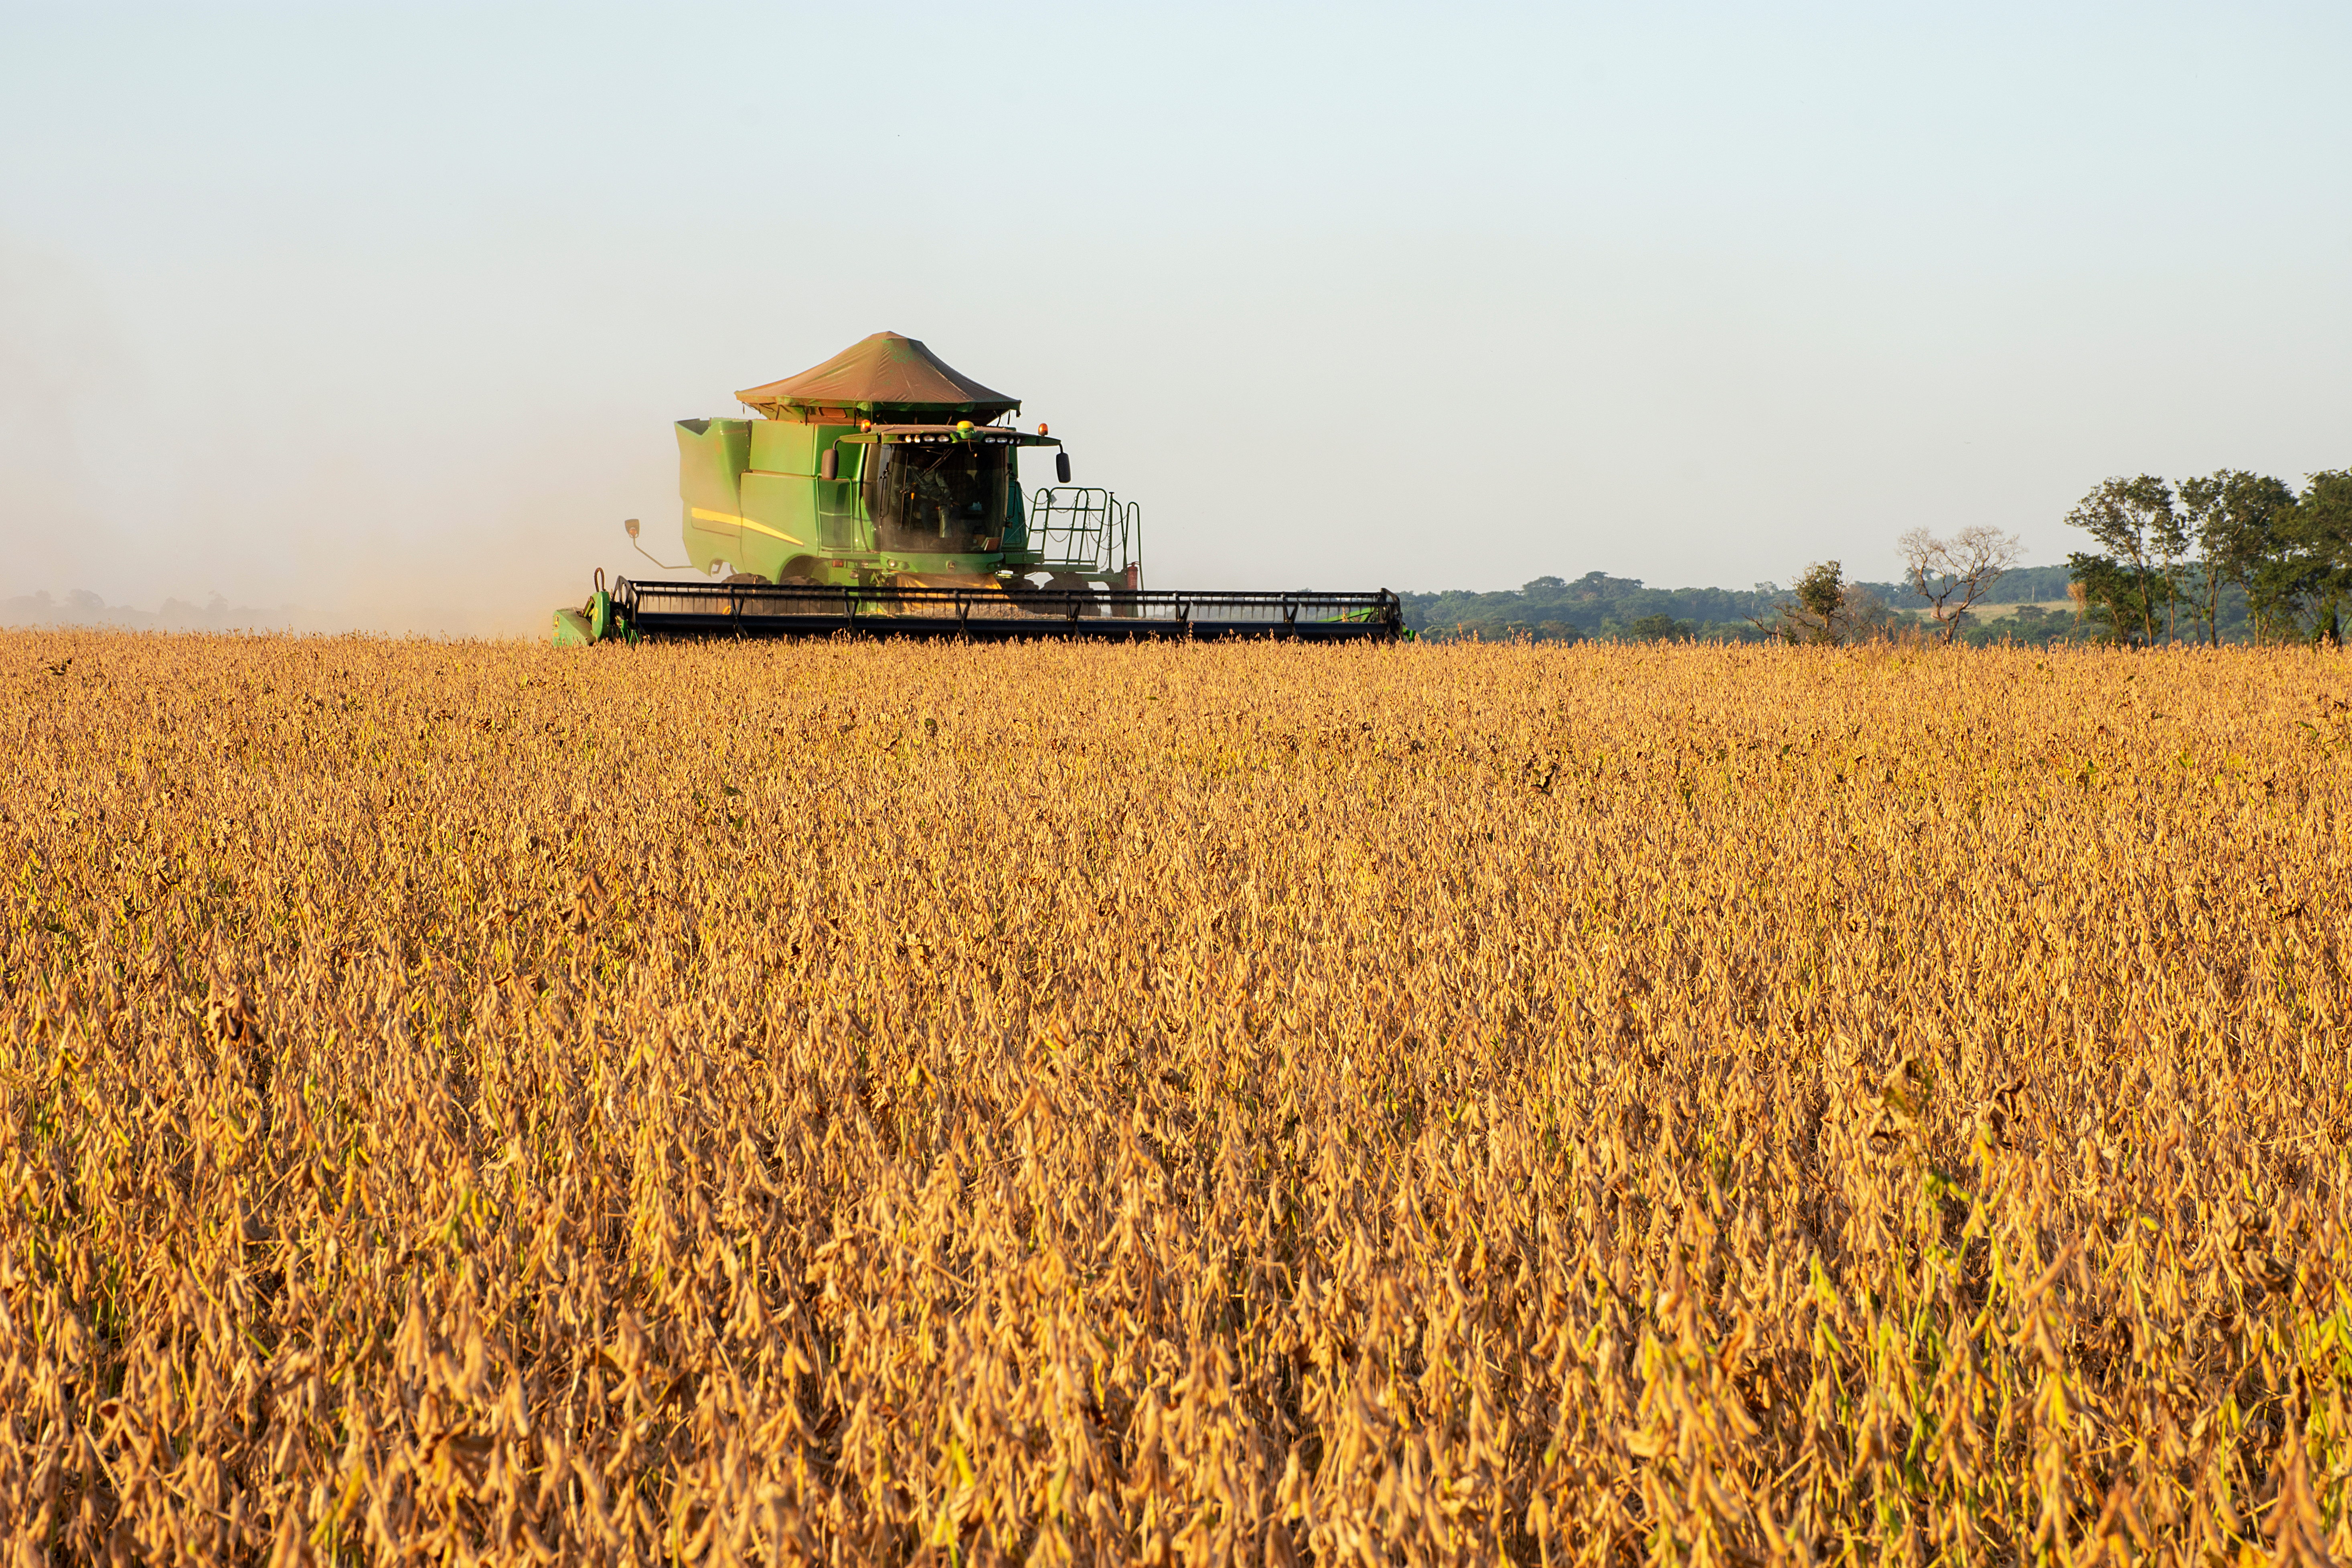 Harvesting soybeans on a farm in Brazil